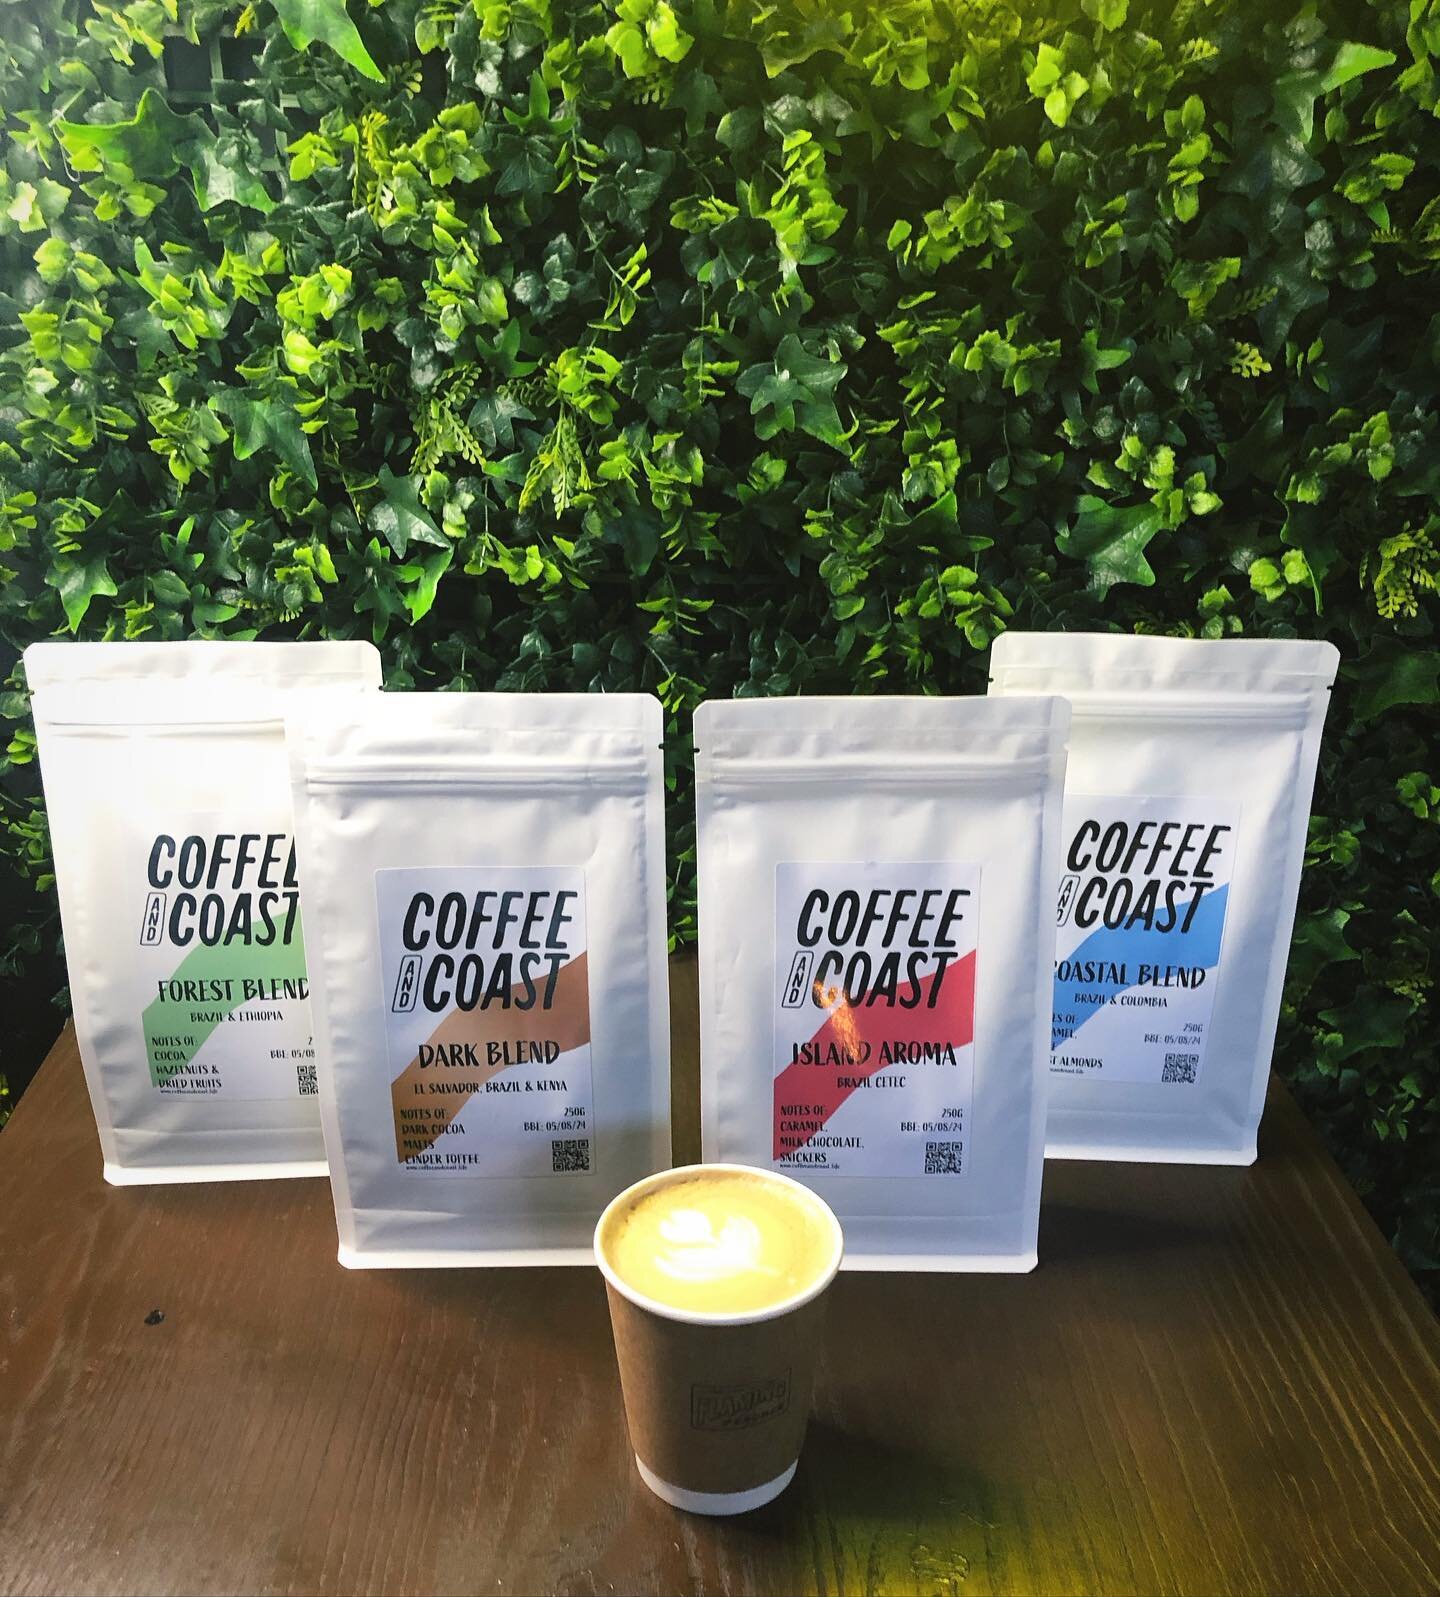 Exciting news! 🎉 Beyond thrilled to announce that you can now find our delicious coffee at @flaming.peaches! 💥 

While online sales are fantastic, nothing beats the joy of partnering with amazing stockists like them. It&rsquo;s all about getting th